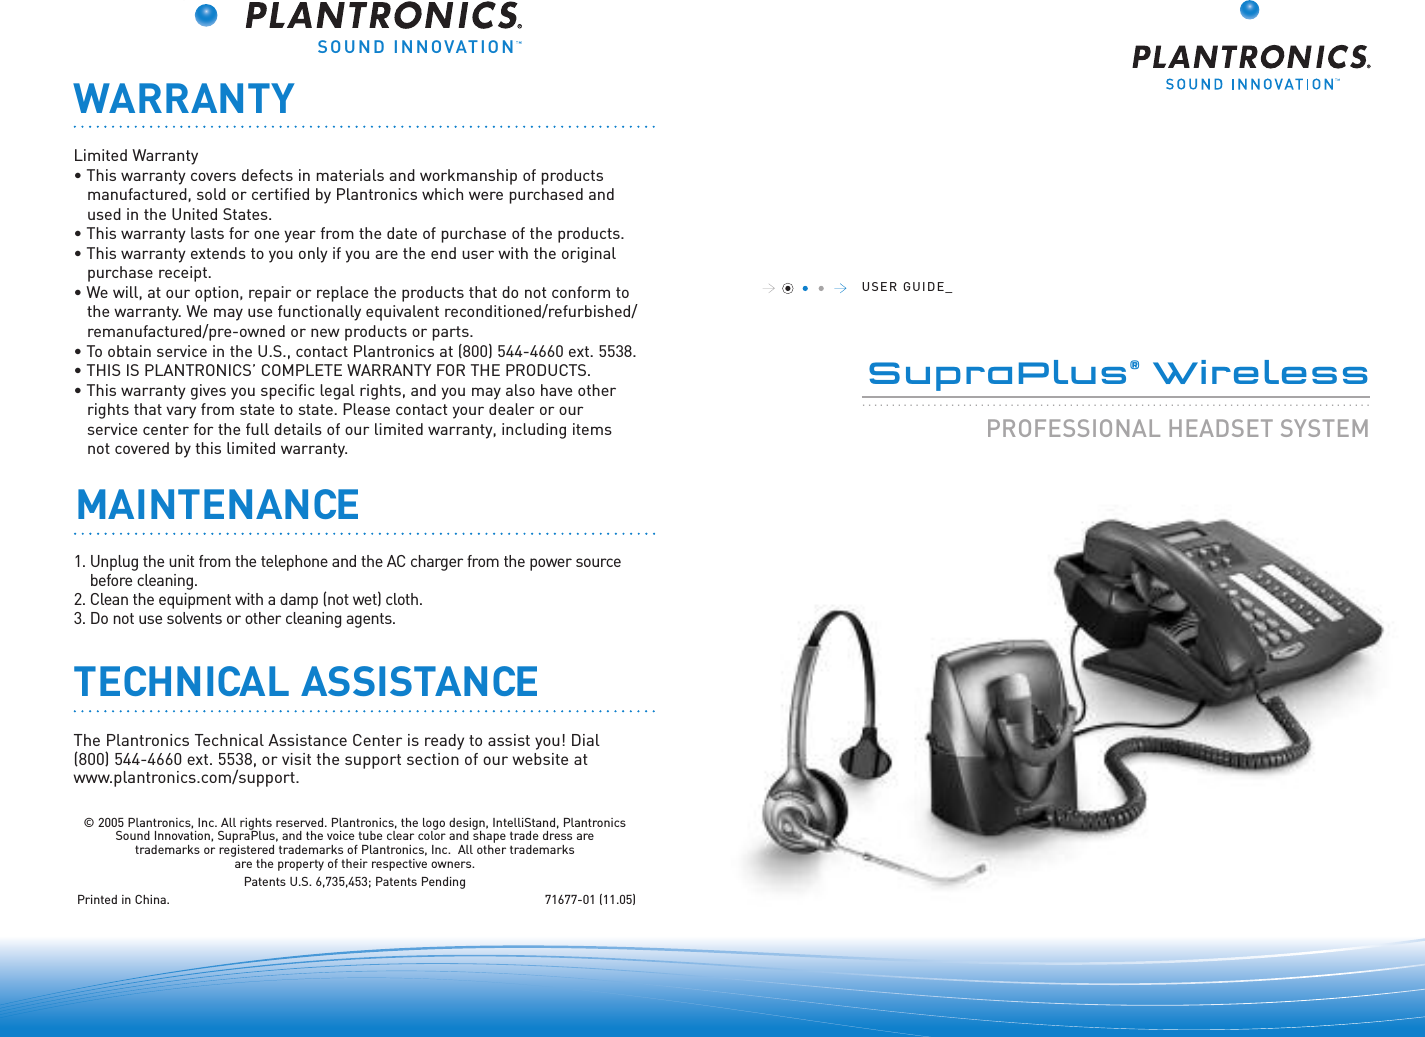 SOUND INNOVATIONUSER GUIDE_SupraPlus®Wireless......................................................................................PROFESSIONAL HEADSET SYSTEM©2005 Plantronics, Inc. All rights reserved. Plantronics, the logo design, IntelliStand, PlantronicsSound Innovation, SupraPlus, and the voice tube clear color and shape trade dress are trademarks or registered trademarks of Plantronics, Inc.  All other trademarks are the property of their respective owners.Patents U.S. 6,735,453; Patents PendingPrinted in China.  71677-01 (11.05)WARRANTYLimited Warranty• This warranty covers defects in materials and workmanship of products manufactured, sold or certified by Plantronics which were purchased and used in the United States.• This warranty lasts for one year from the date of purchase of the products.• This warranty extends to you only if you are the end user with the originalpurchase receipt.• We will, at our option, repair or replace the products that do not conform tothe warranty. We may use functionally equivalent reconditioned/refurbished/remanufactured/pre-owned or new products or parts.•To obtain service in the U.S., contact Plantronics at (800) 544-4660 ext. 5538.• THIS IS PLANTRONICS’ COMPLETE WARRANTY FOR THE PRODUCTS.• This warranty gives you specific legal rights, and you may also have other rights that vary from state to state. Please contact your dealer or our service center for the full details of our limited warranty, including items not covered by this limited warranty.The Plantronics Technical Assistance Center is ready to assist you! Dial (800) 544-4660 ext. 5538, or visit the support section of our website atwww.plantronics.com/support.TECHNICAL ASSISTANCEMAINTENANCE1. Unplug the unit from the telephone and the AC charger from the power sourcebefore cleaning.2. Clean the equipment with a damp (not wet) cloth. 3. Do not use solvents or other cleaning agents.  